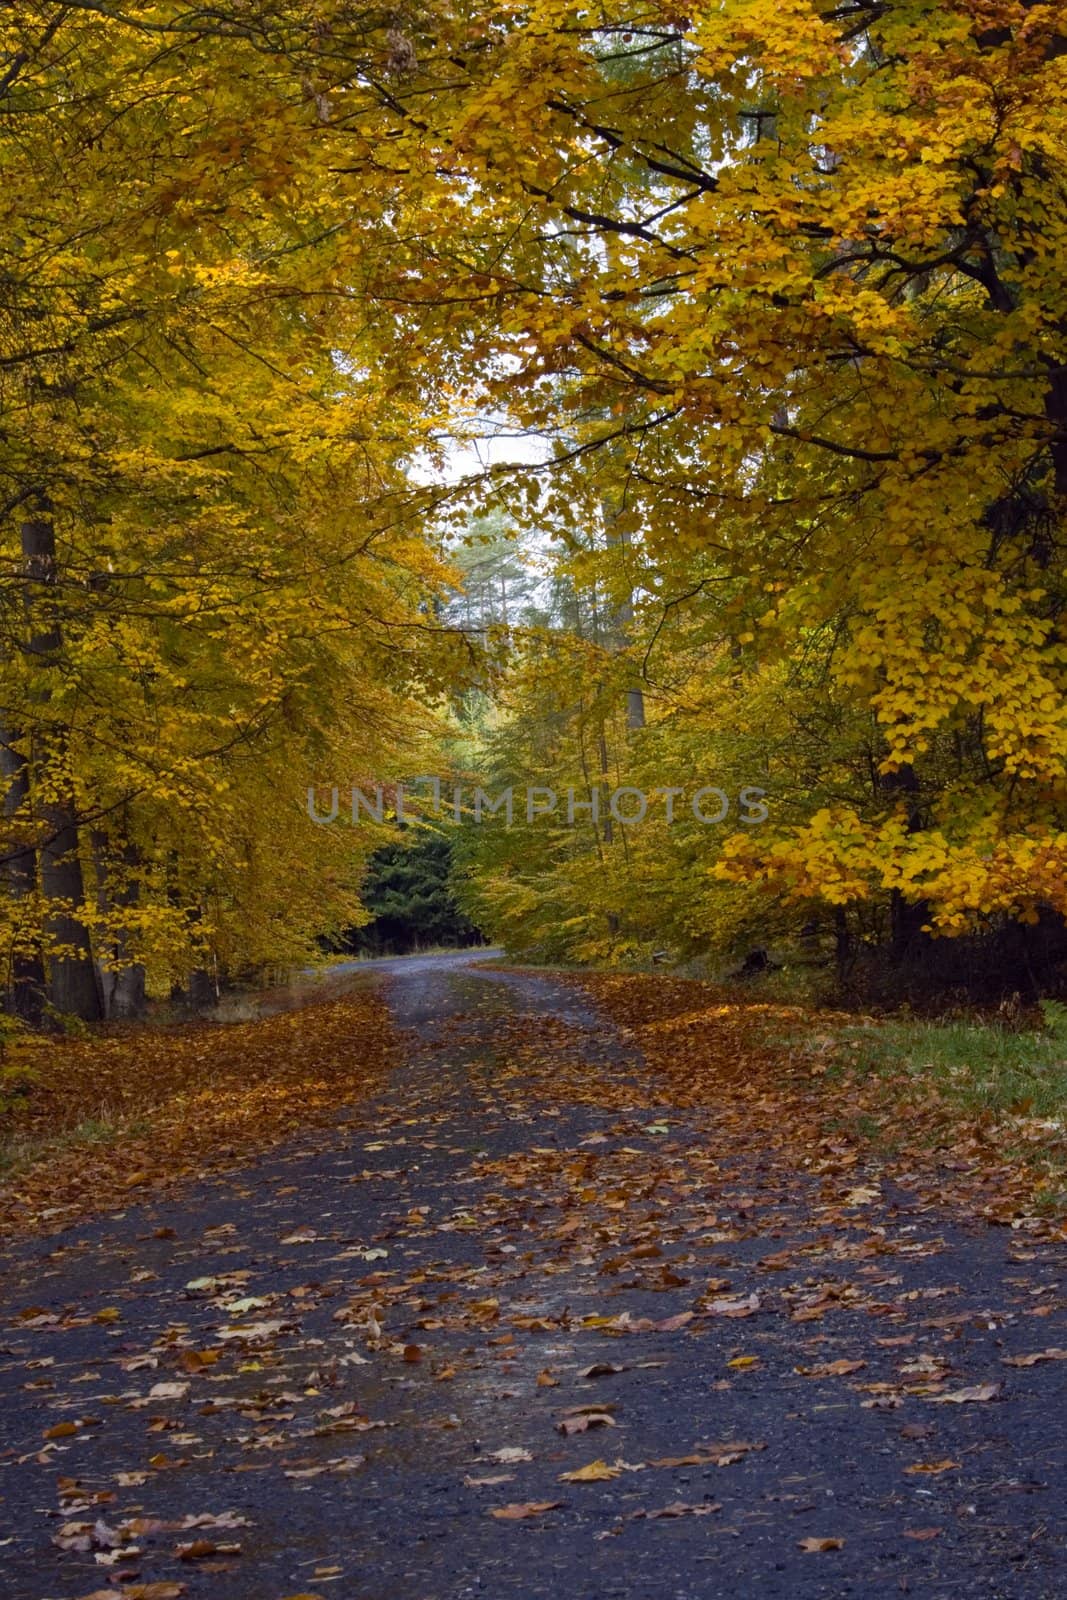 Mountain Road in Autumn by werg